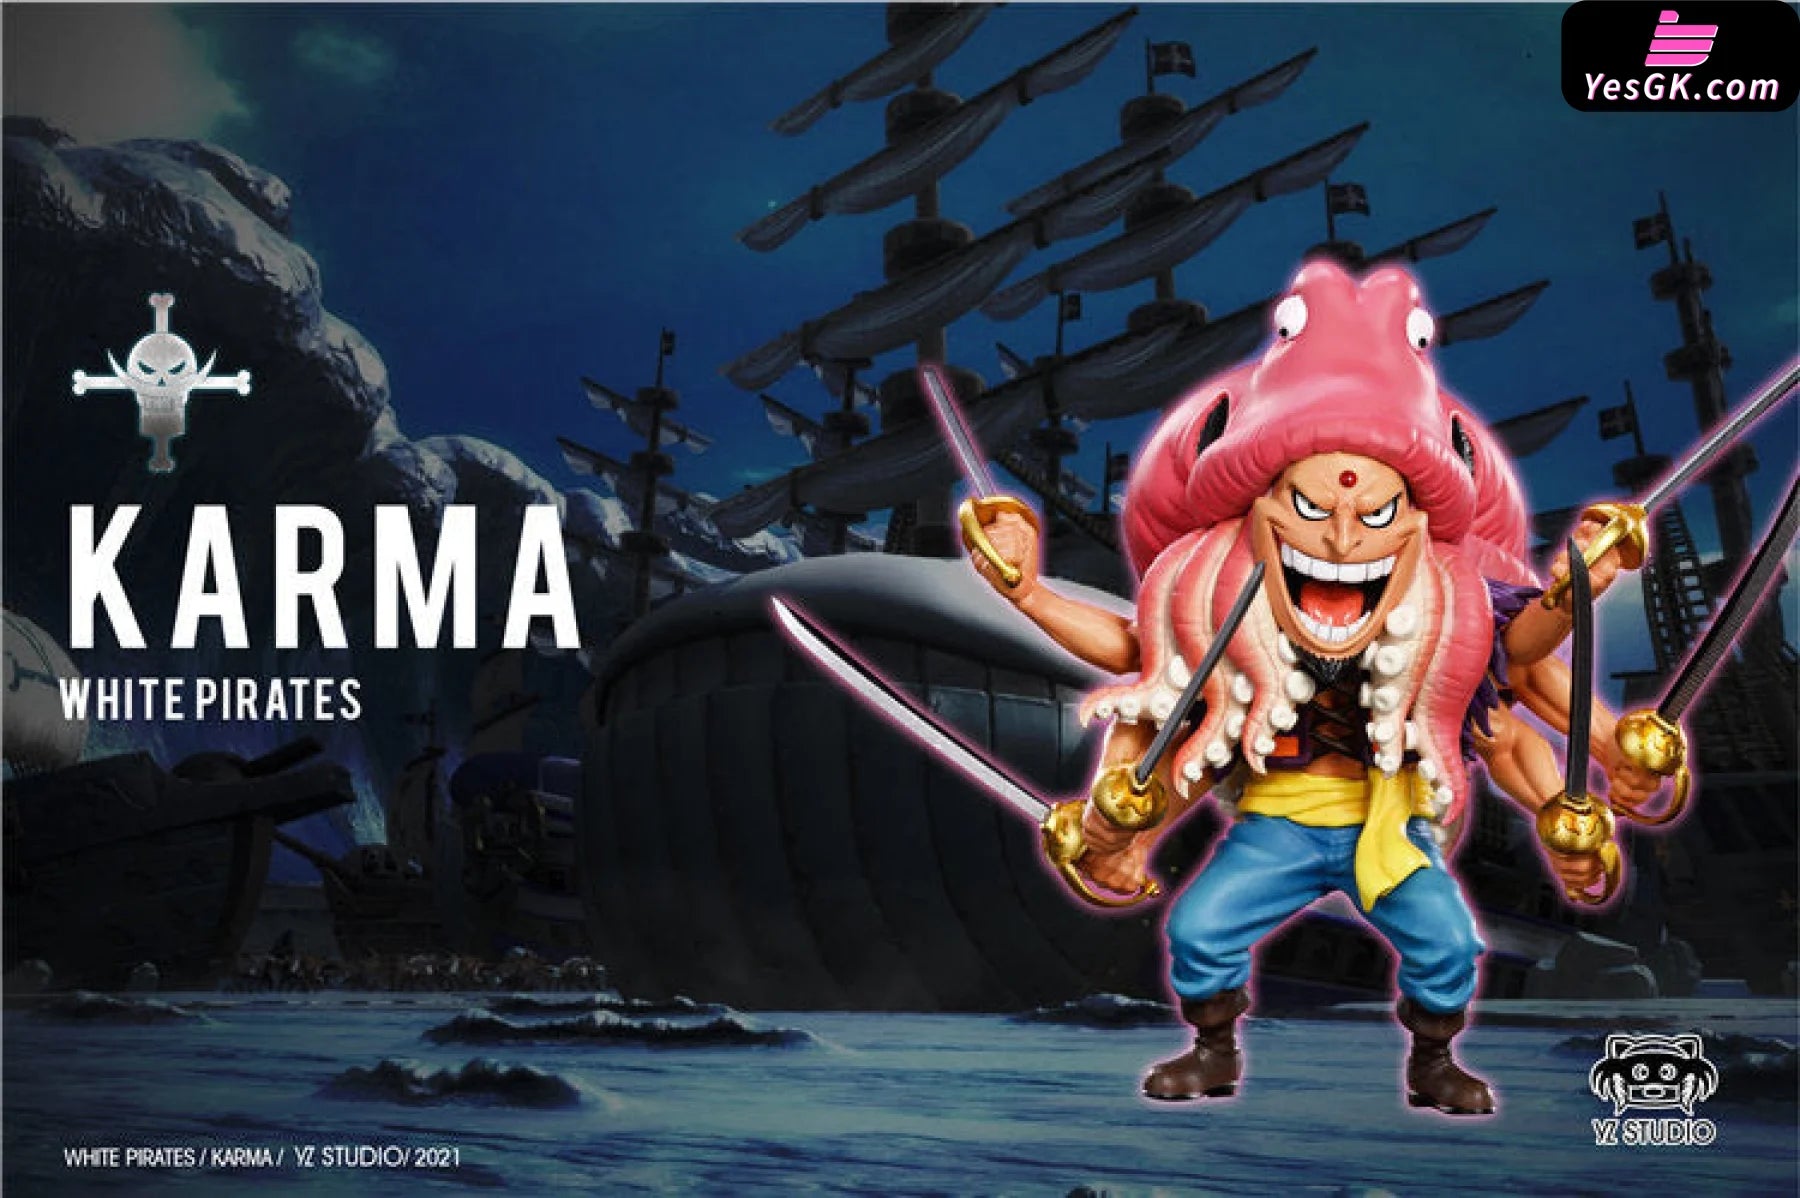 One Piece Whitebeard Pirates Doma And Karma Resin Statue - Yz Studio [Pre-Order Closed] Full Payment